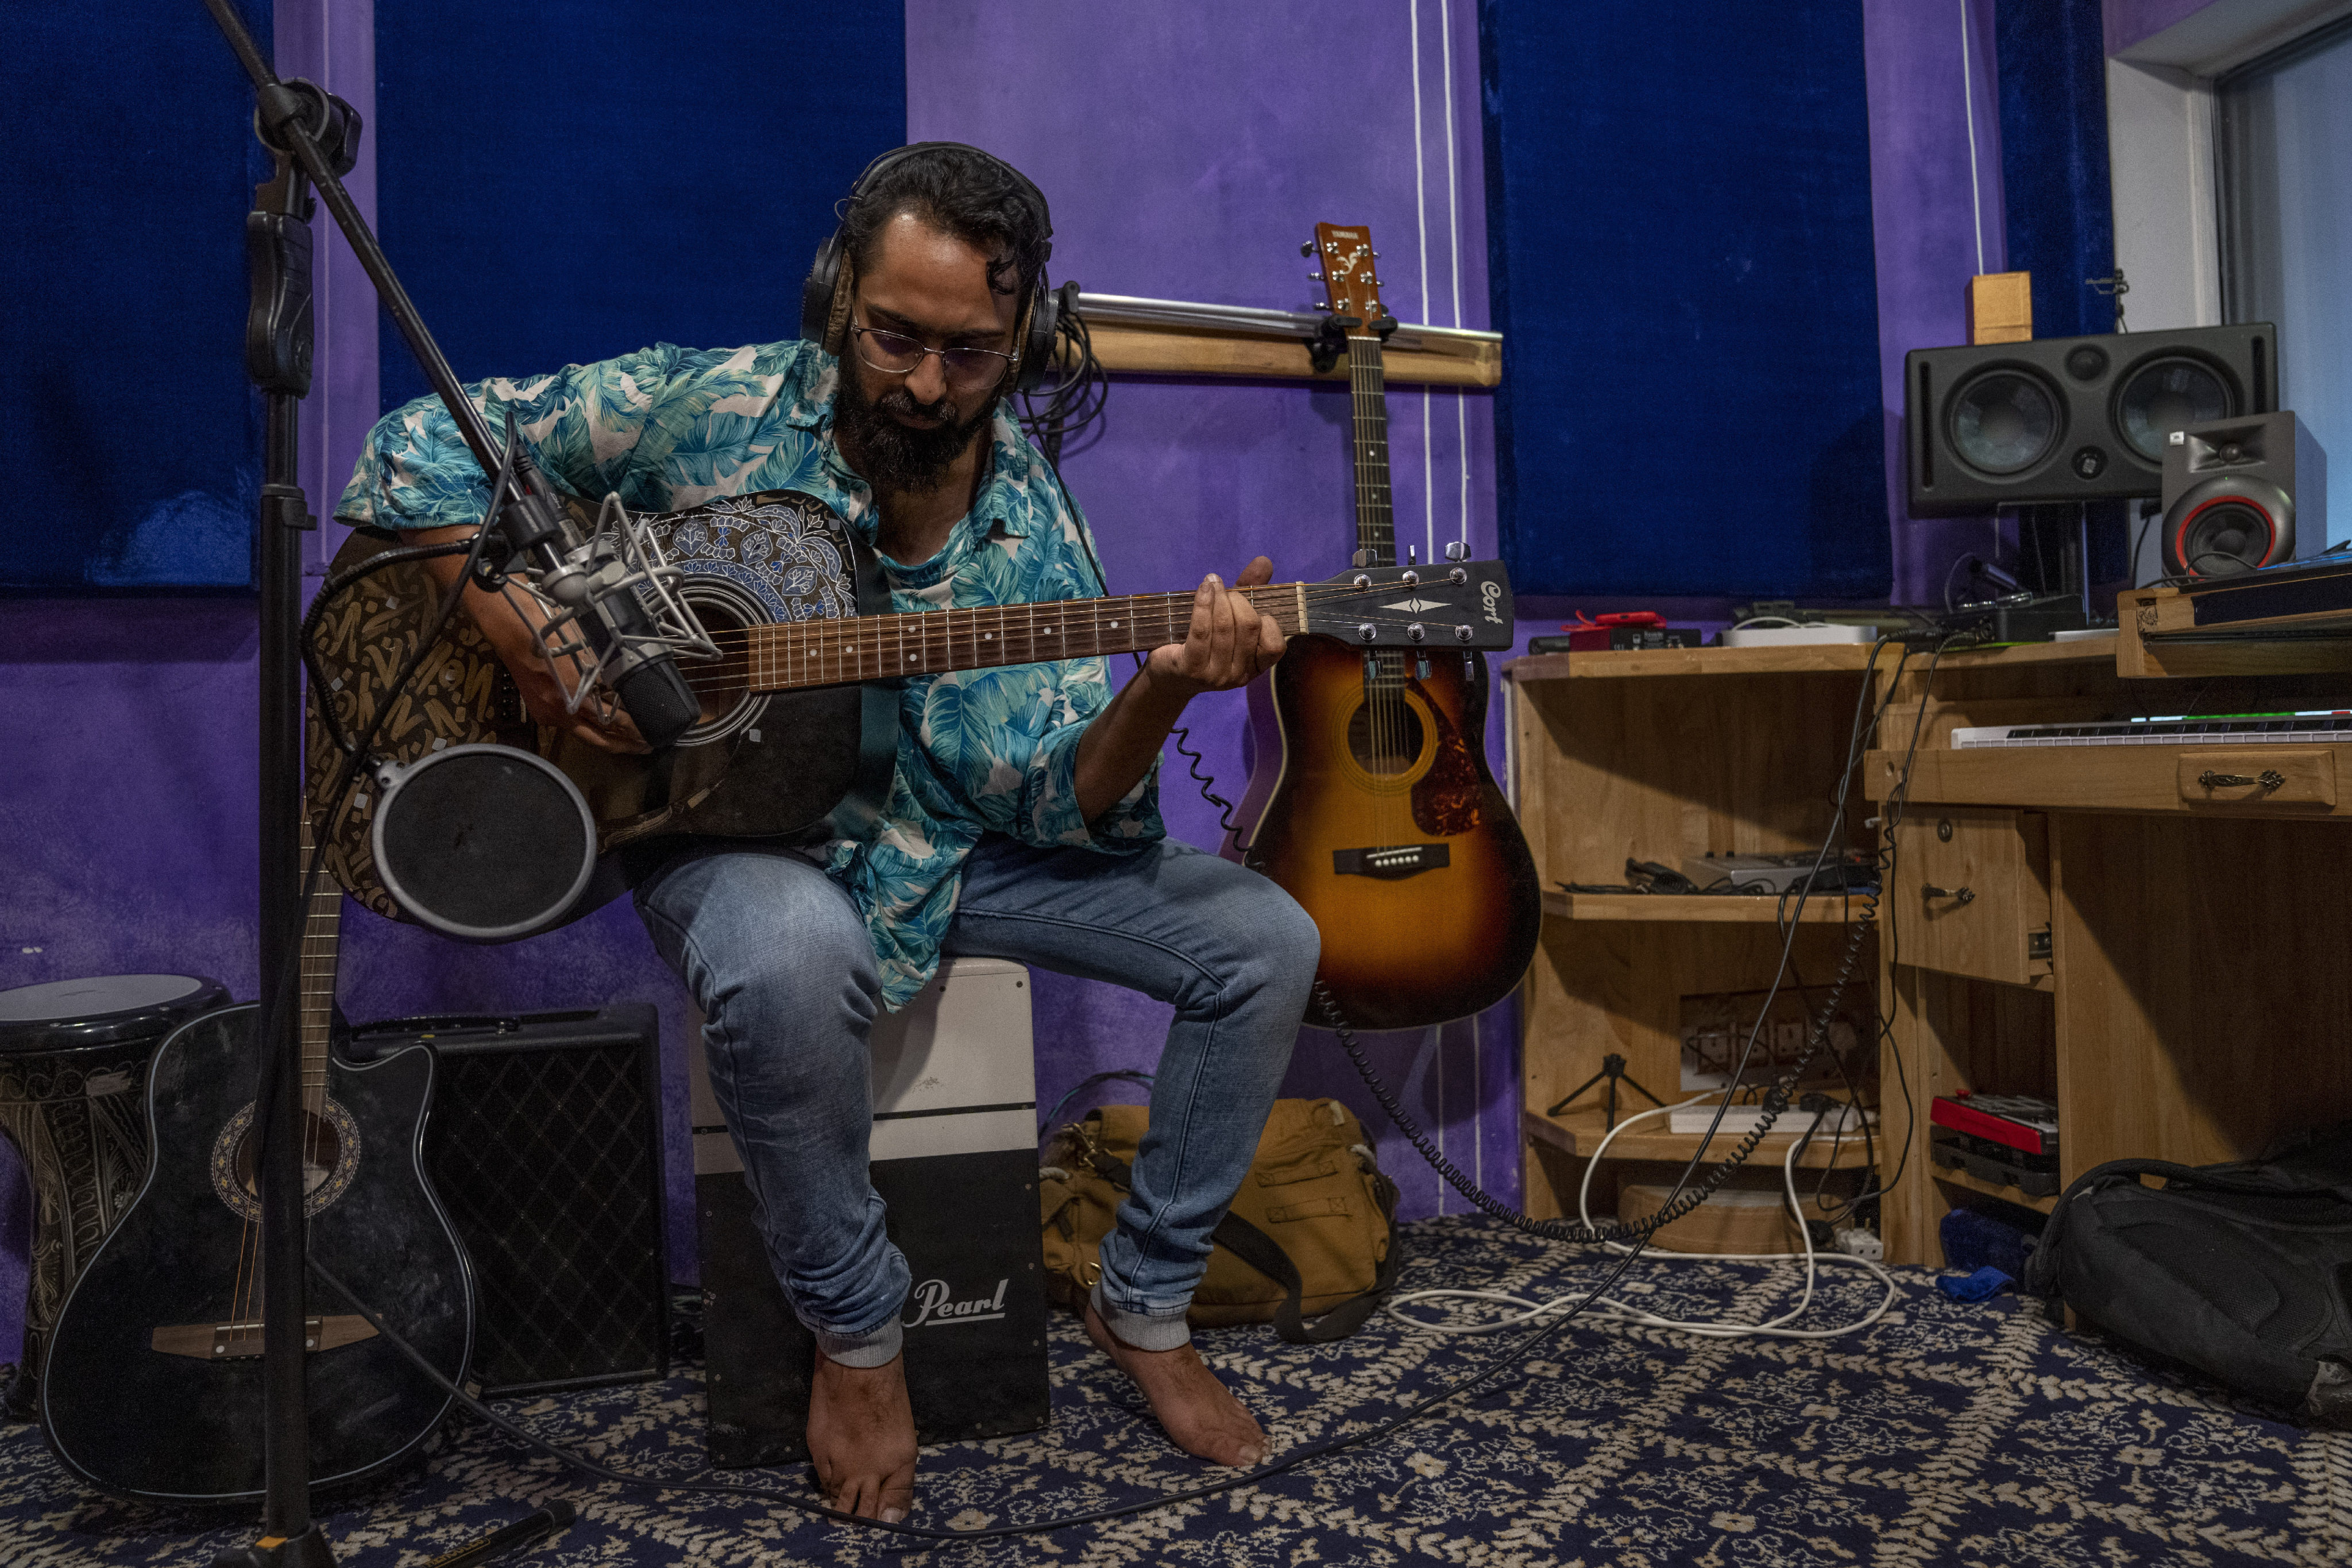 Musicians and artists in Kashmir embody a new form of music, a blend of progressive rock and hip hop that is an assertive expression of the region’s political and cultural aspirations. Photo: AP